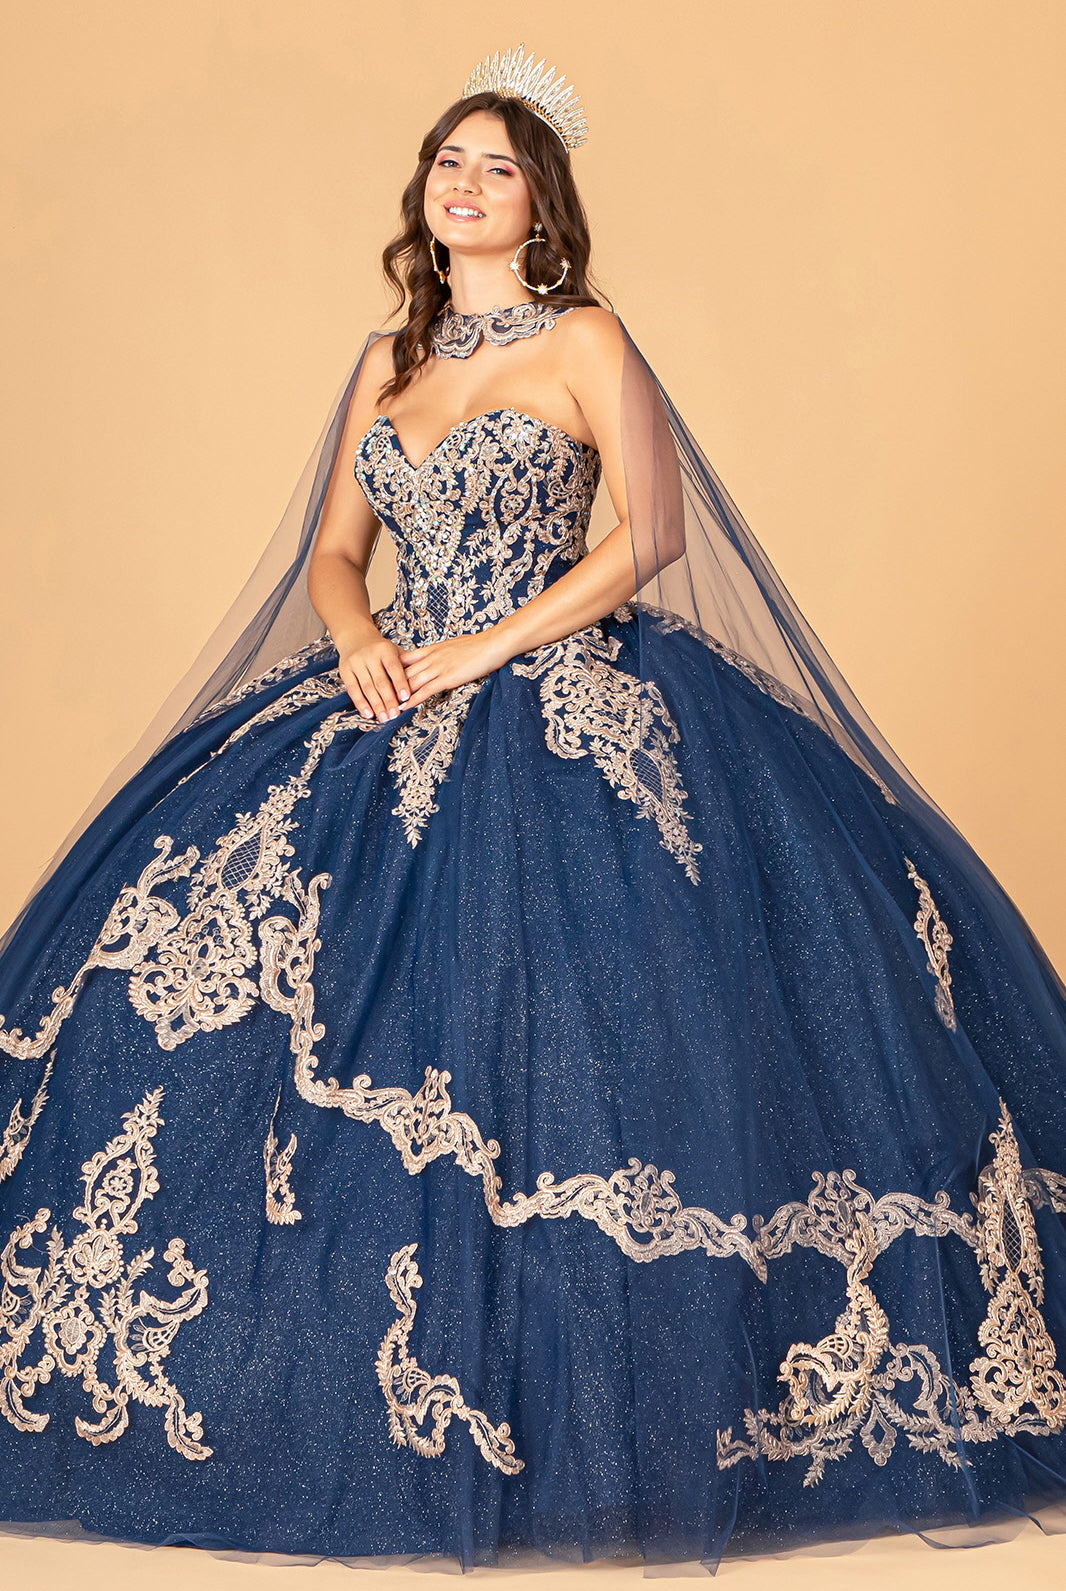 Glitter Jewel Embellished Quinceanera Gown Long Mesh Cape-smcdress